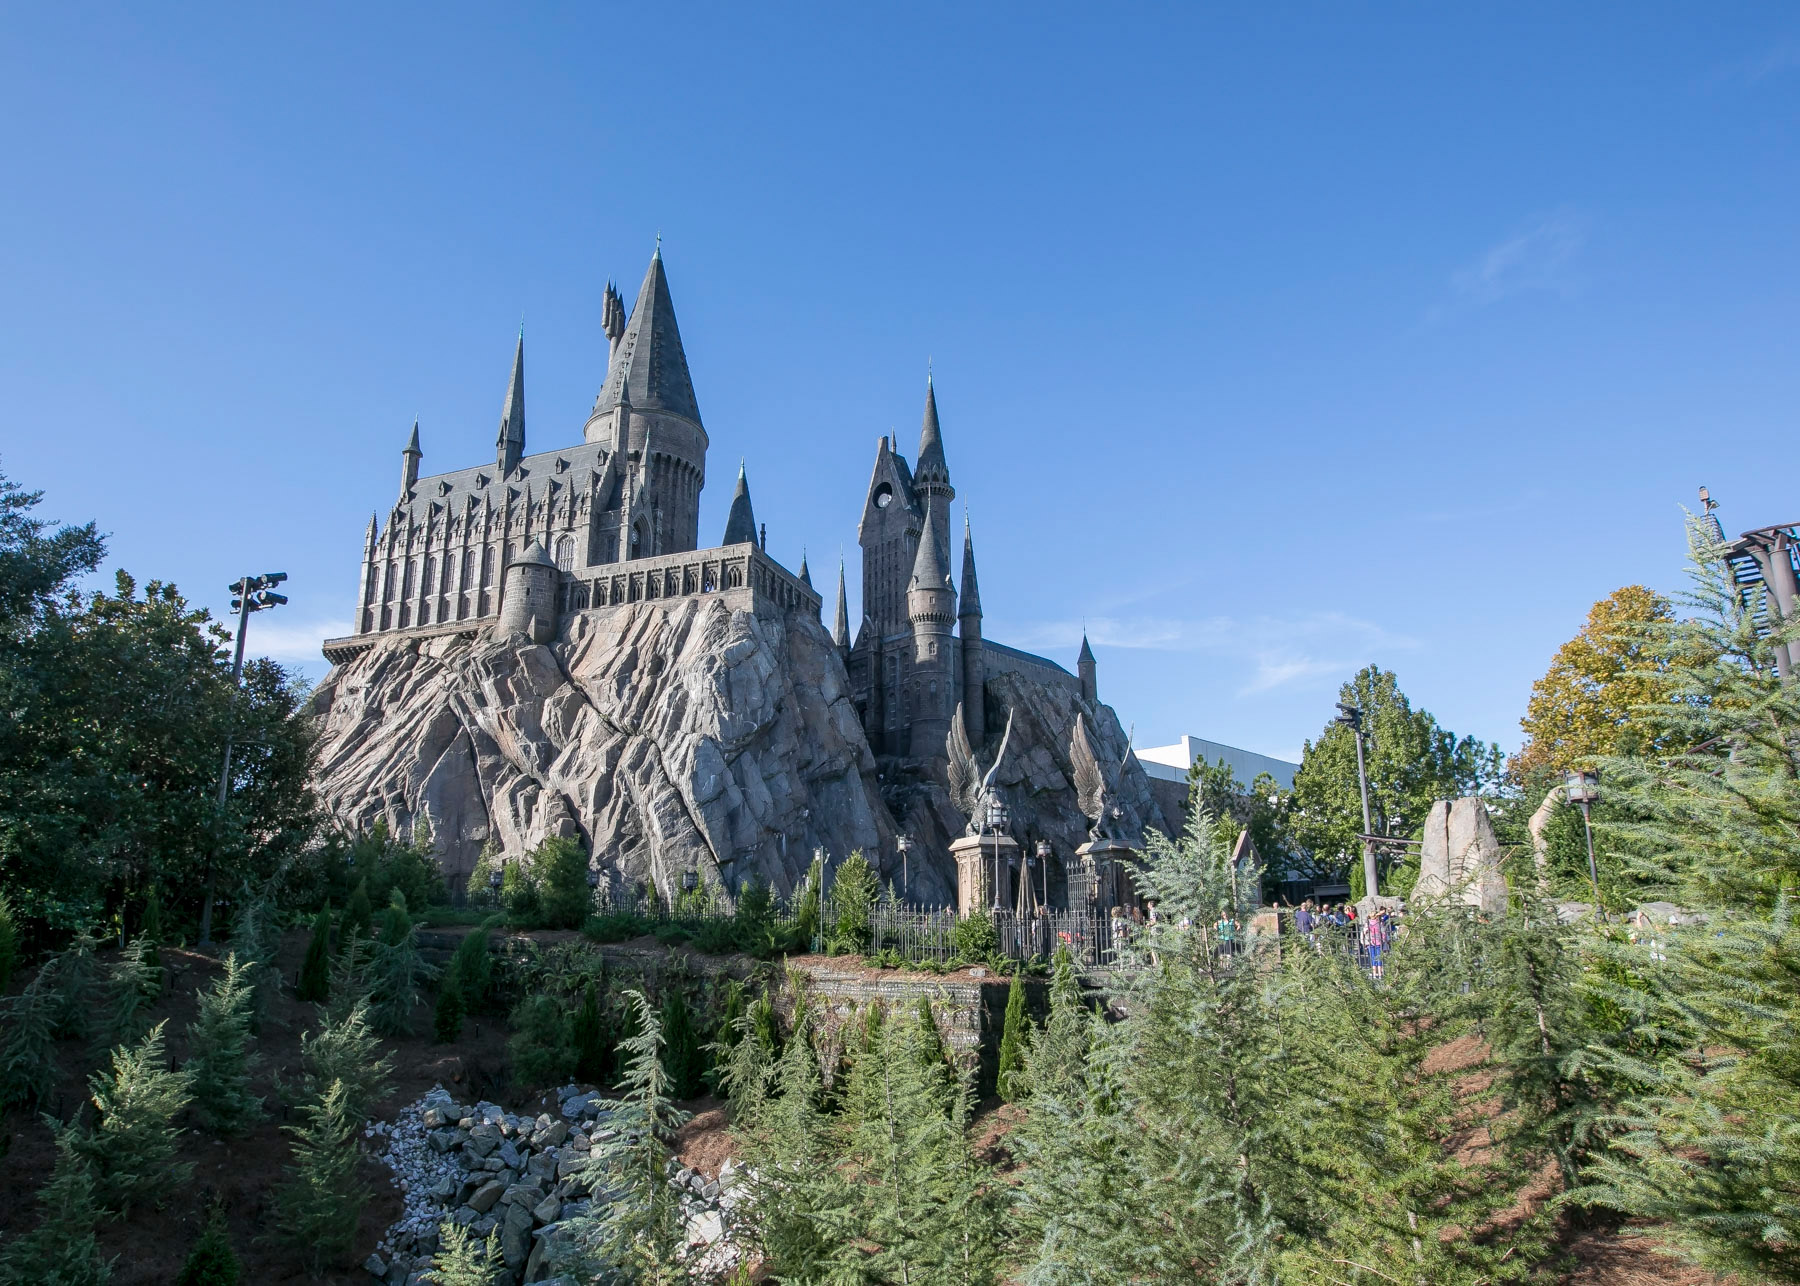 General view of Hogwarts Castle at Wizarding World of Harry Potter Diagon Alley at Universal Orlando on October 24, 2016 in Orlando, Florida.